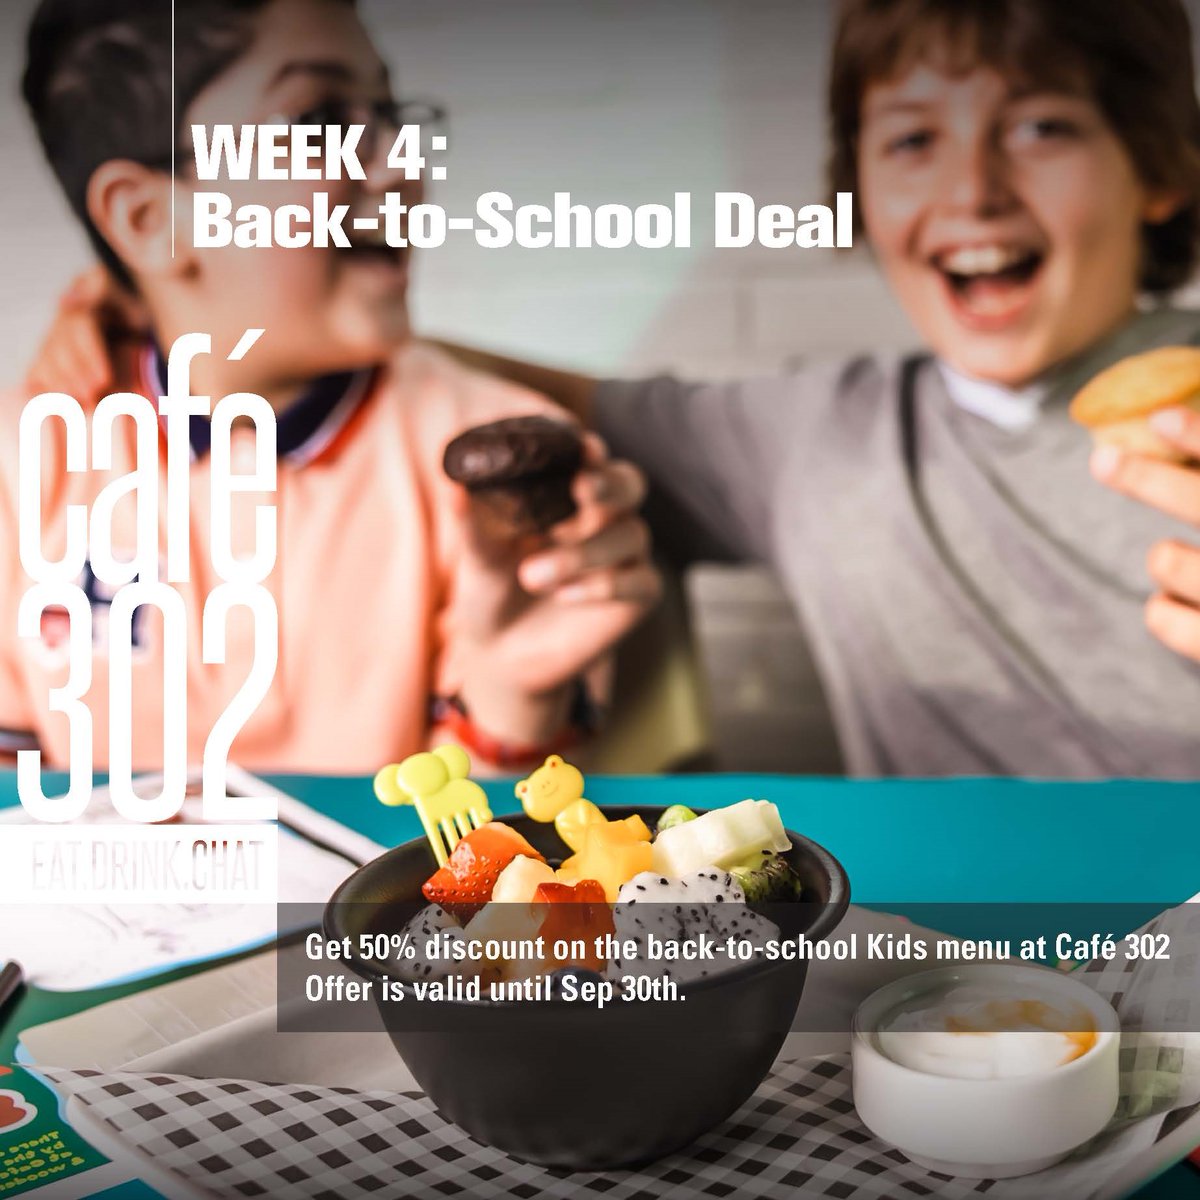 Don’t miss out on the chance to get 50% discount on kids menu at @cafe302 🎒🚌🍔🍟🥞

This offer is valid until Sep 30.

#backtoschool #inabudhabi #abudhabilife #abudhabirestaurant #rotanahotels #almahaarjaanbyrotana #café302turns7 #café302moments